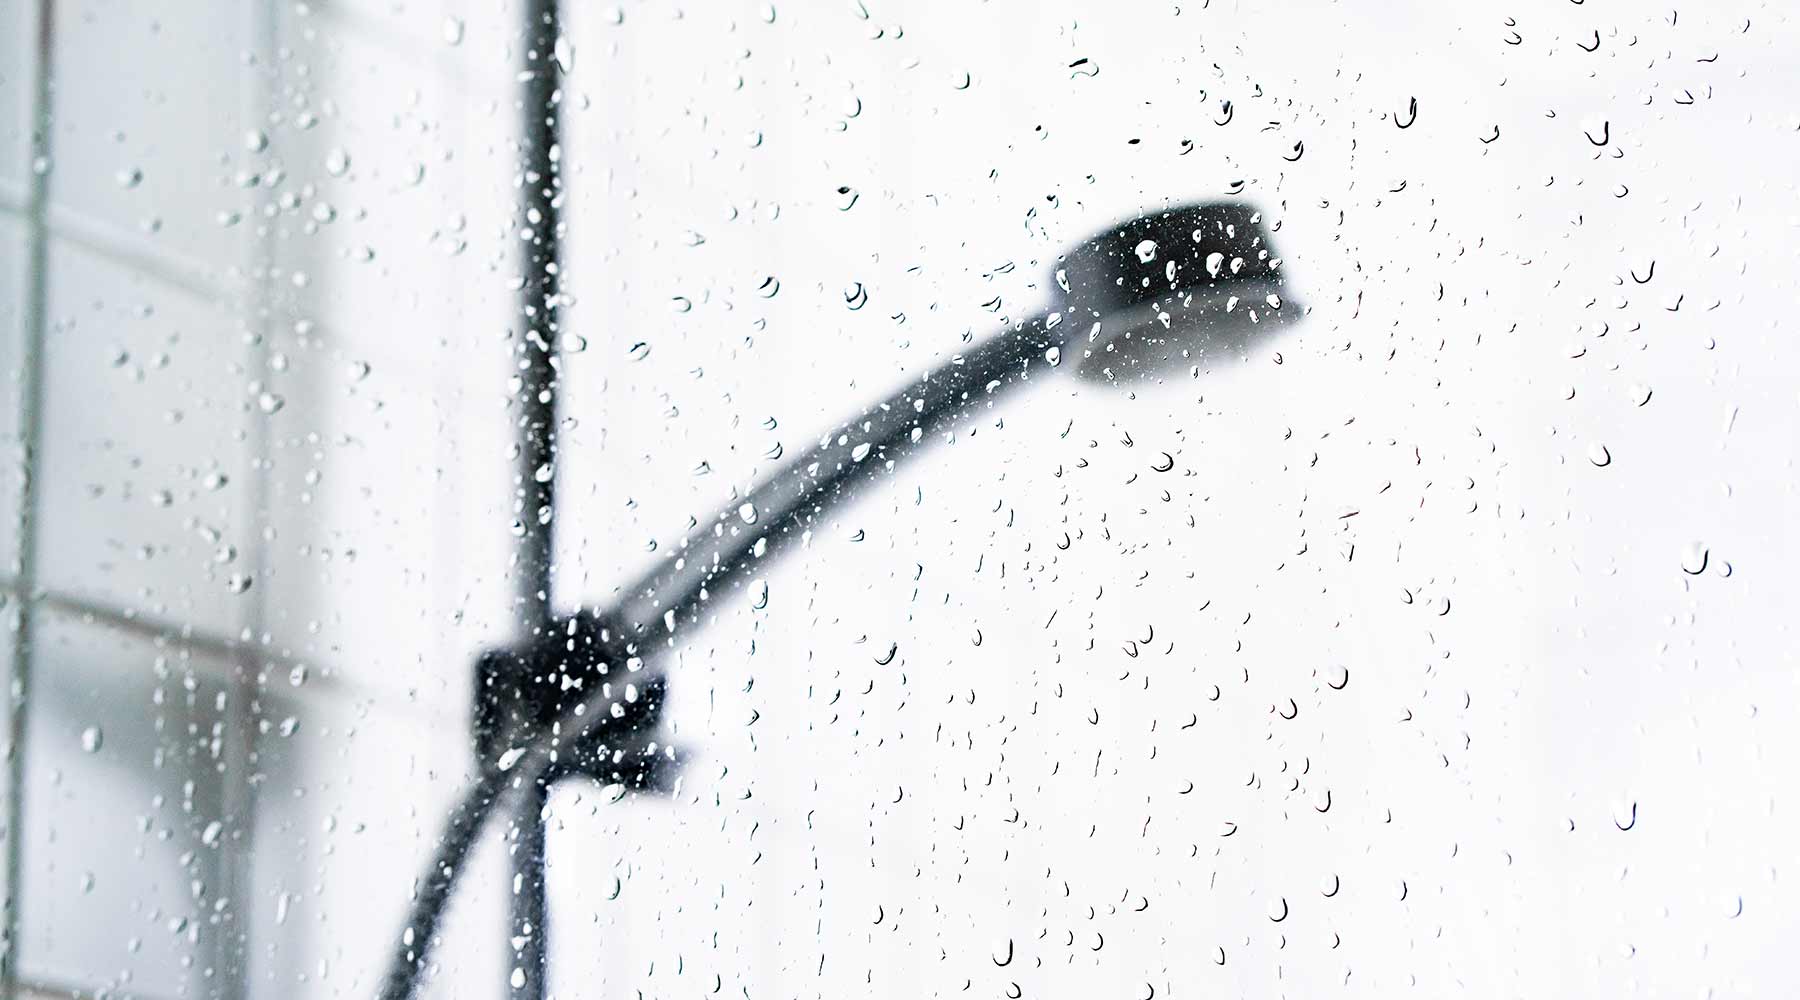 8 Benefits of Applying a Hydrophobic Coating to Shower Glass